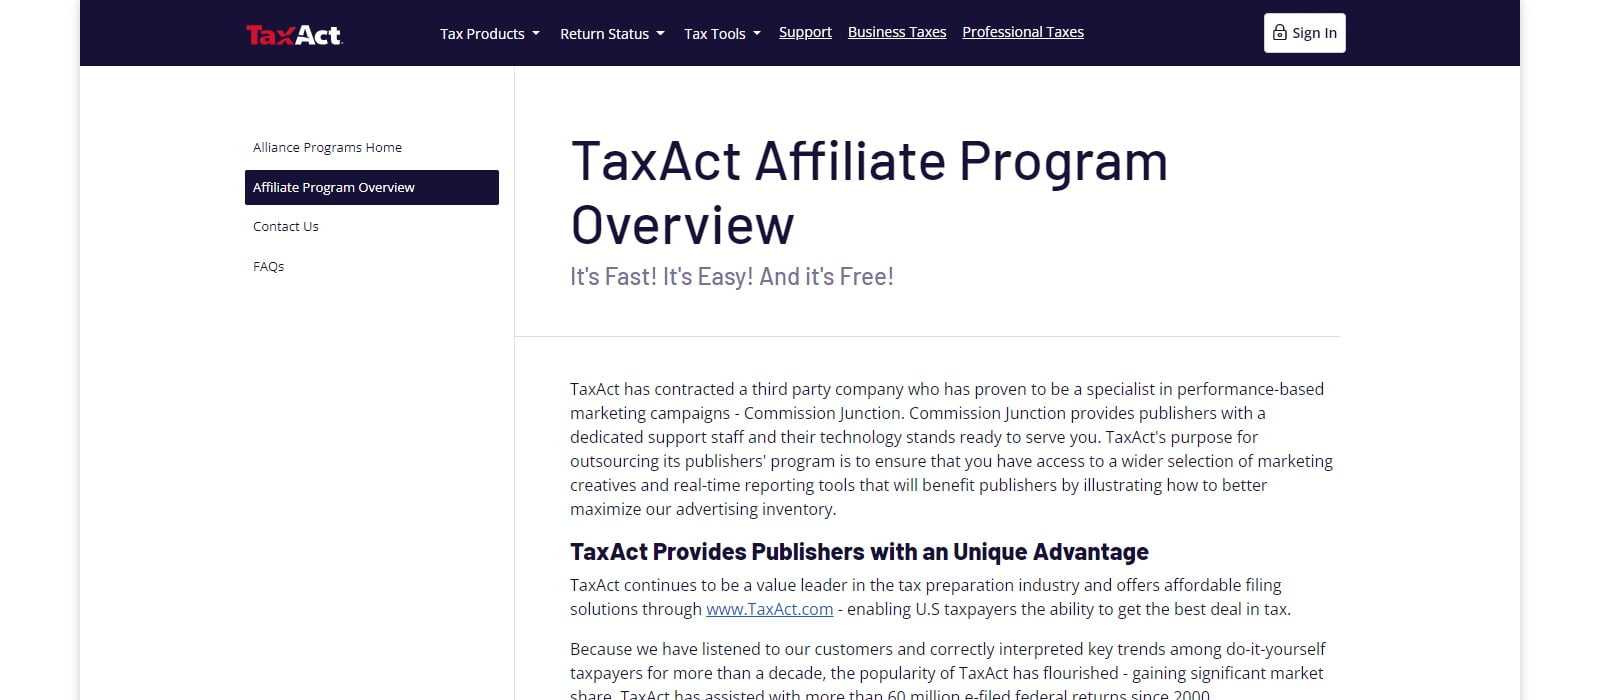 TaxAct Affiliate Program Review: Earn Up to 15% per Sale